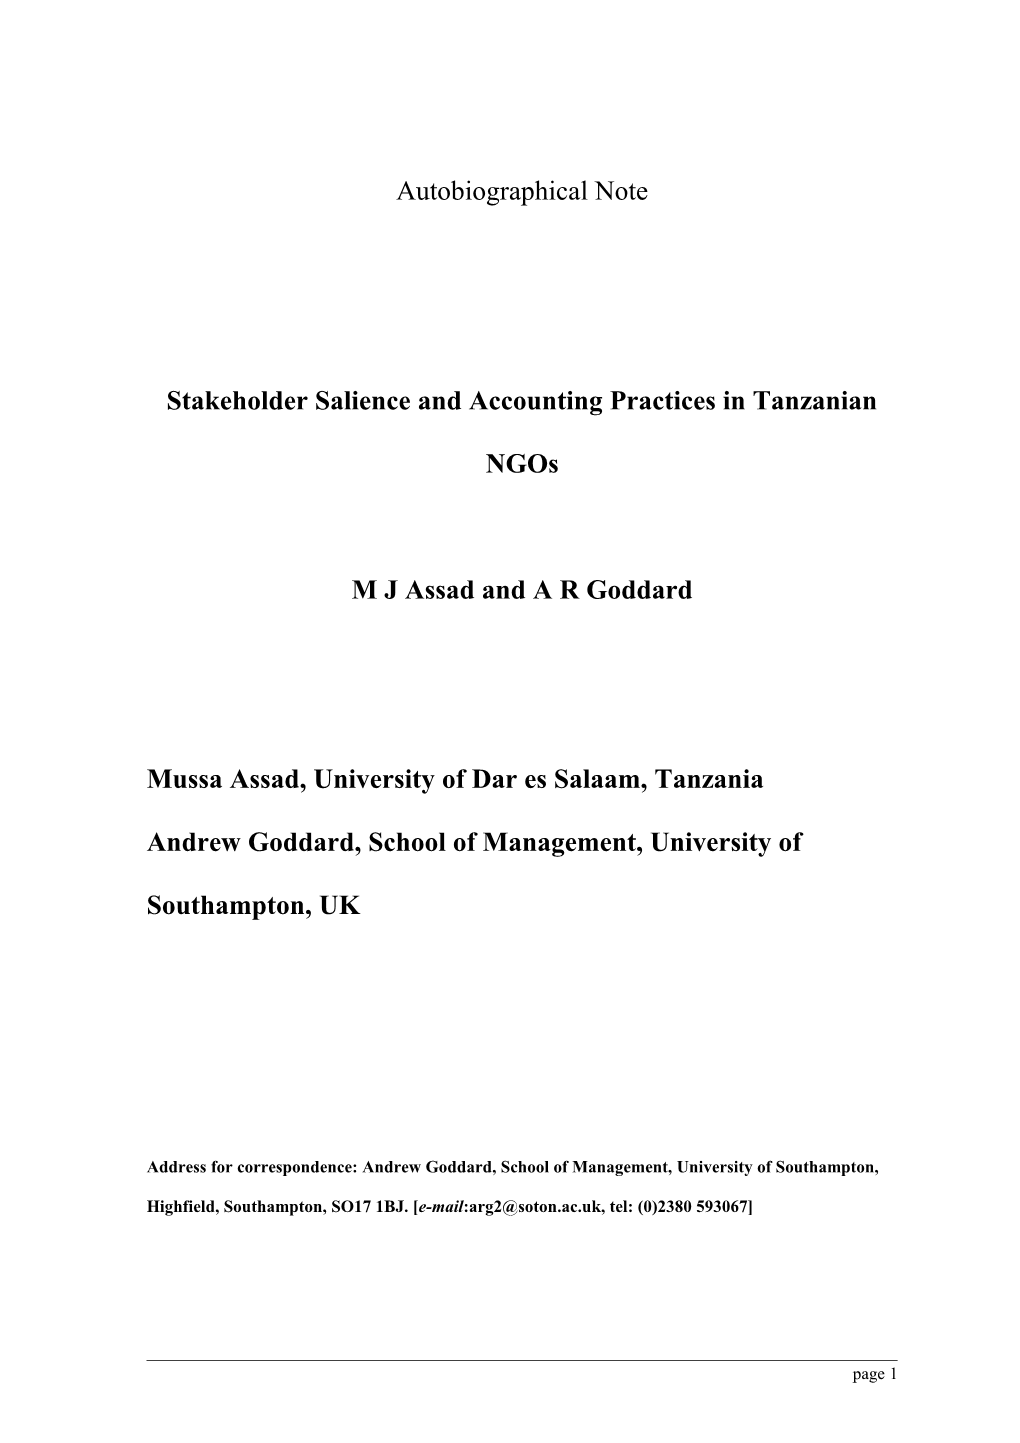 Stakeholder Salience and Accounting Practices in Tanzanian Ngos